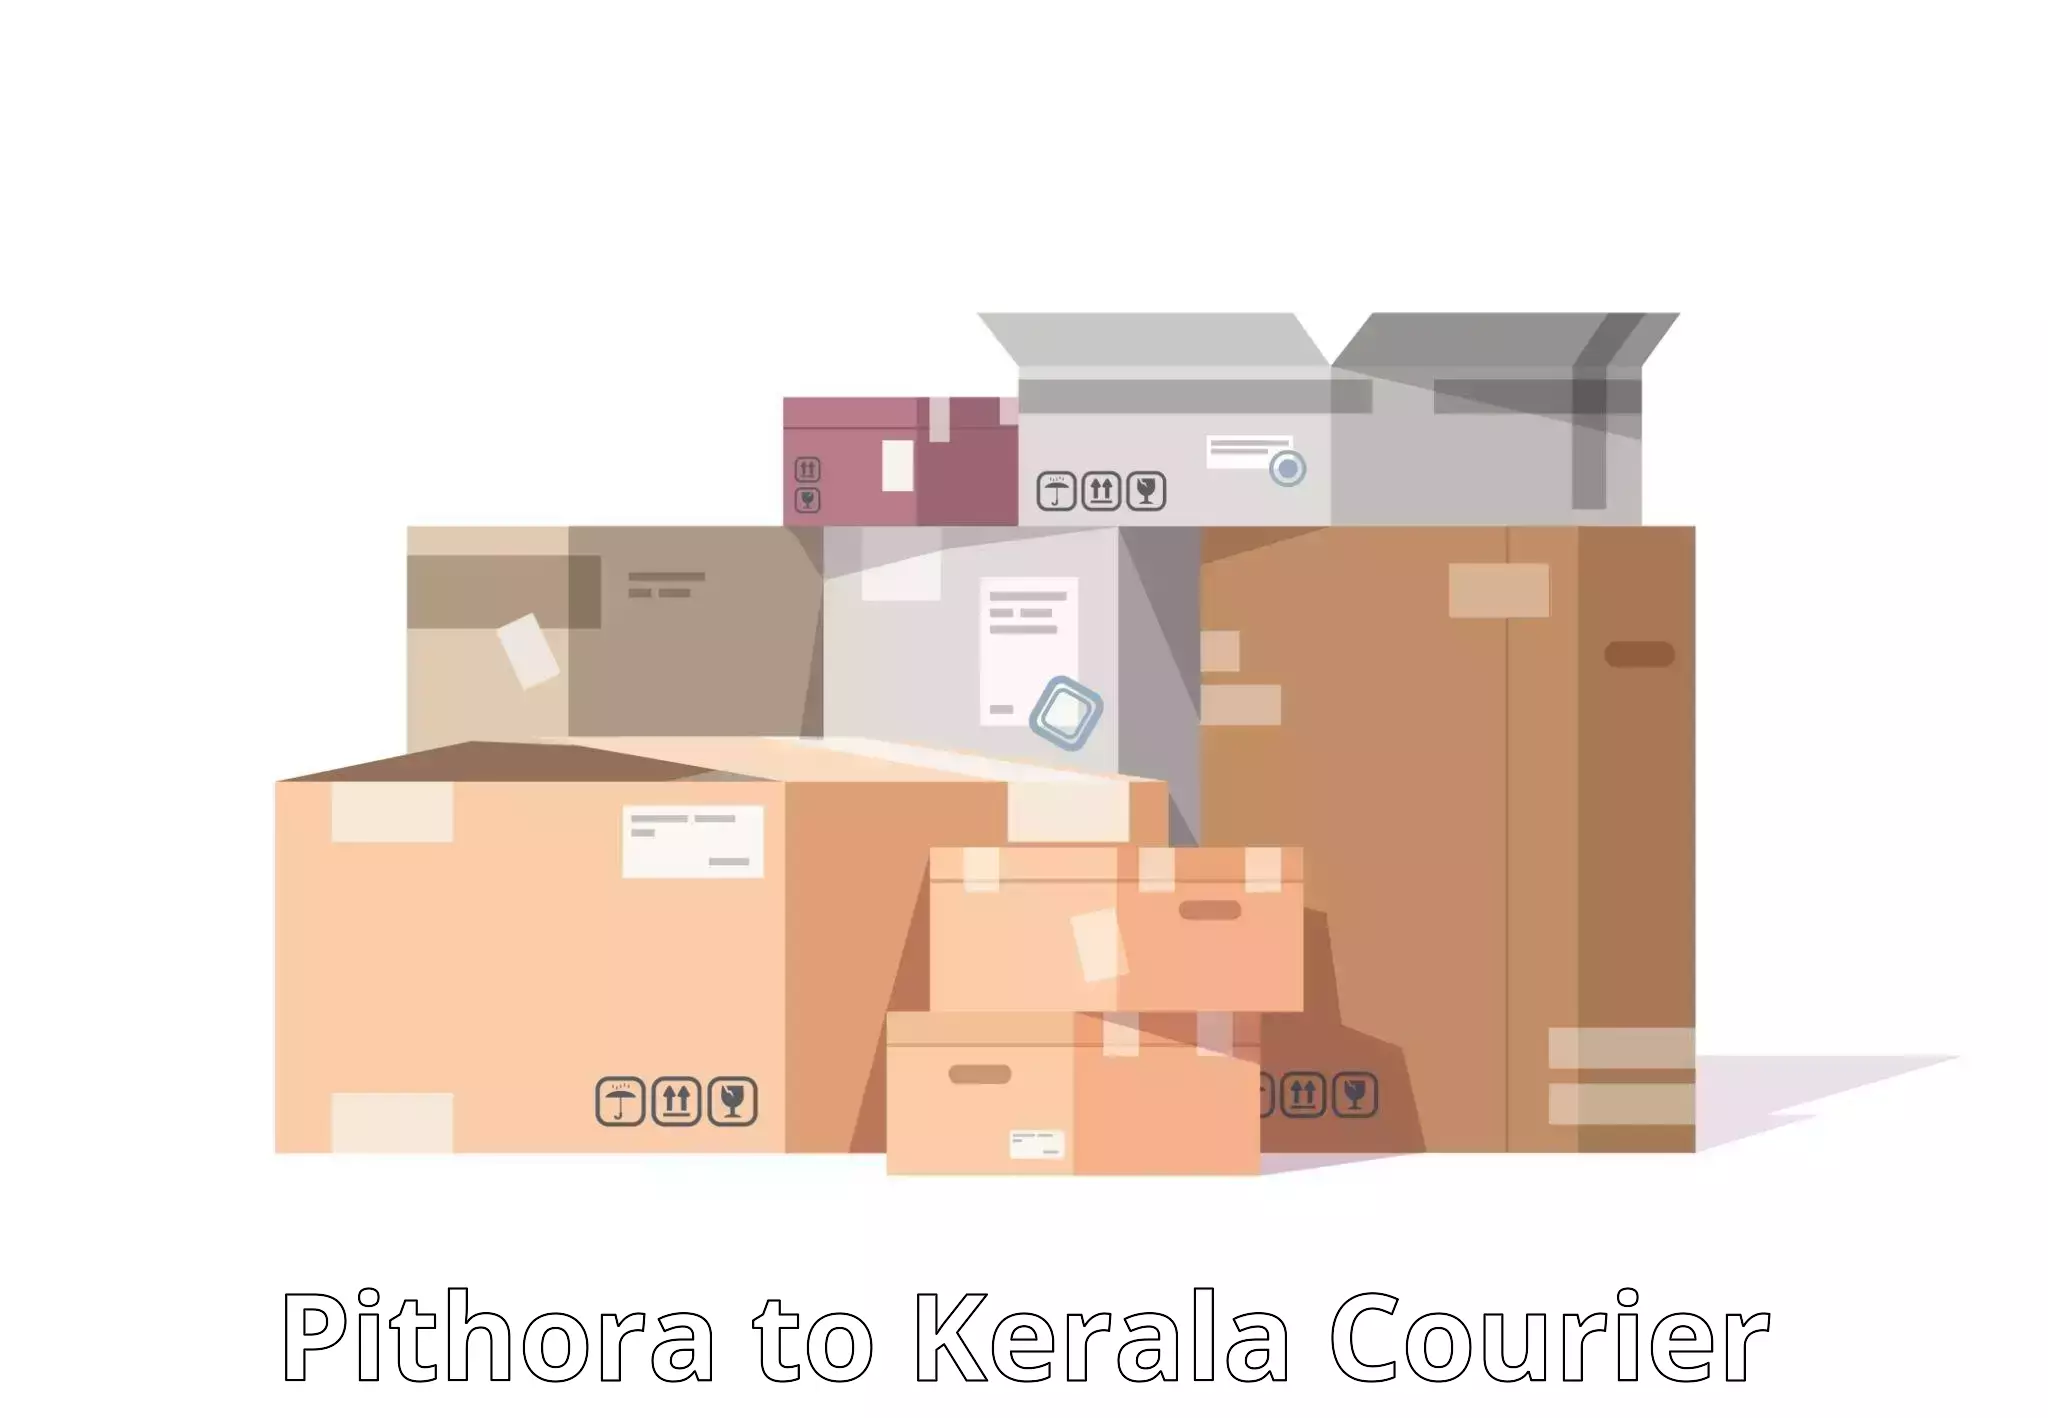 Global shipping networks Pithora to Trivandrum